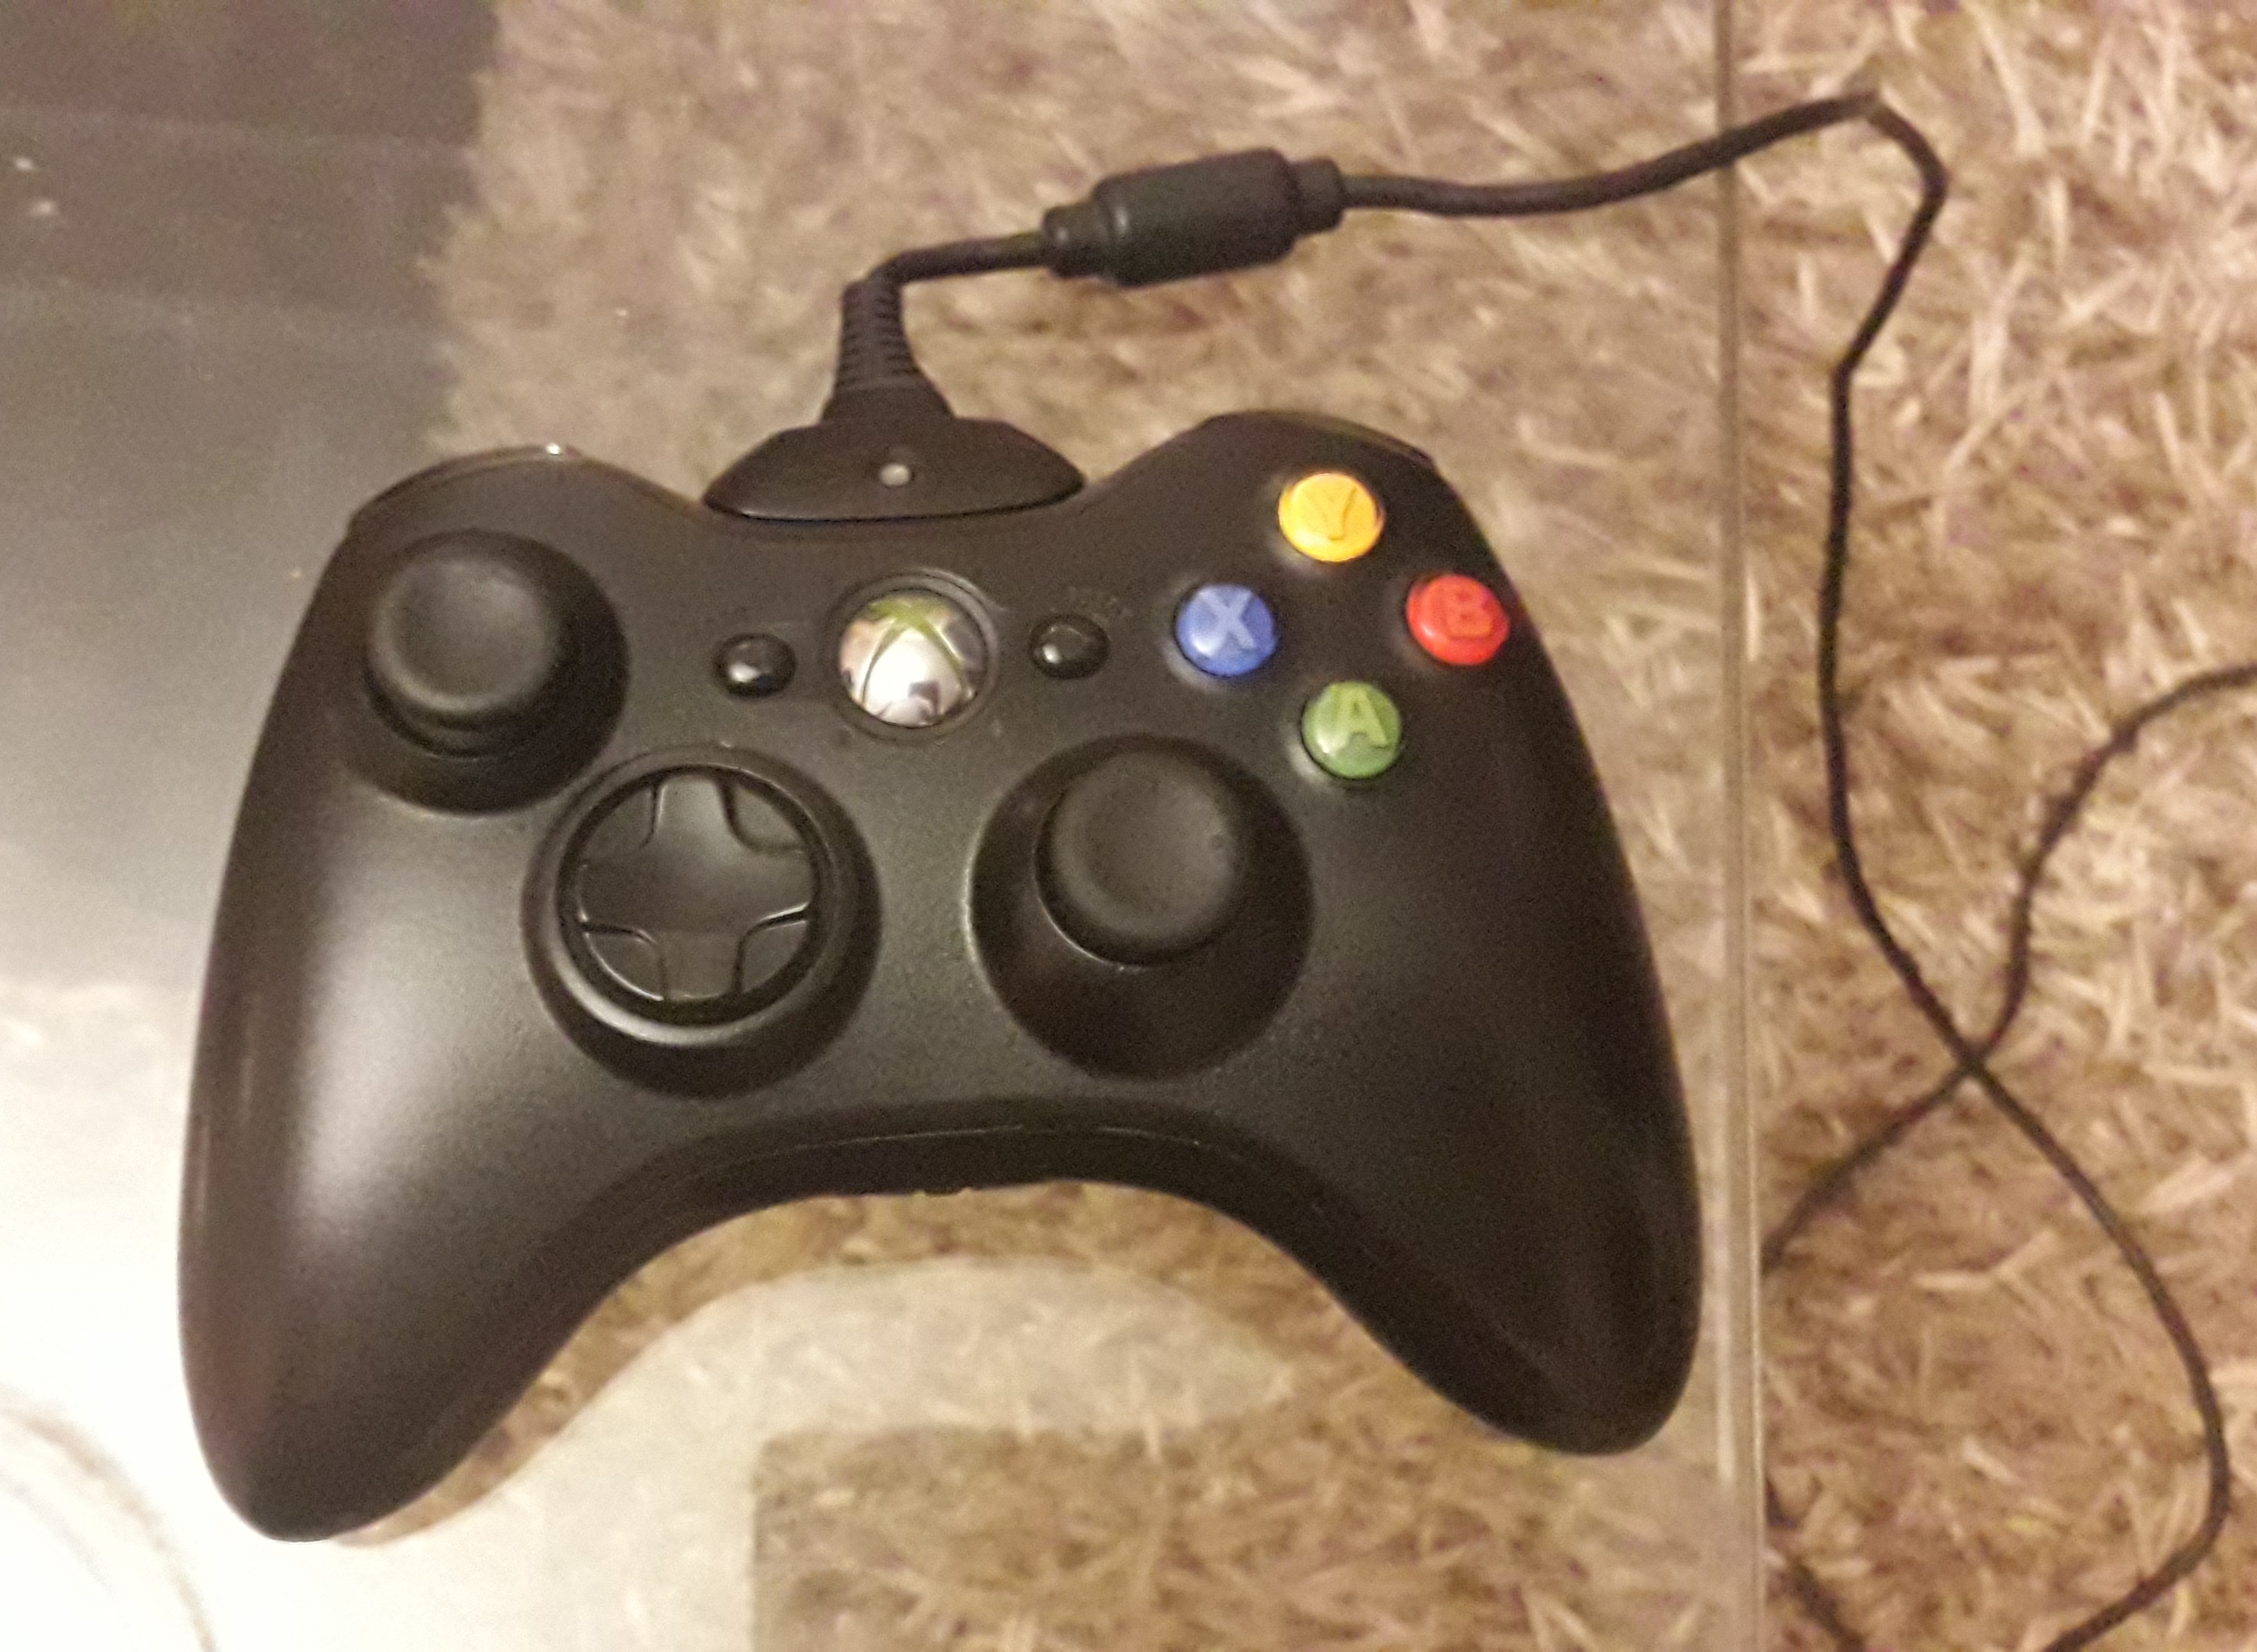 Xbox 360 Controller doesn't know when to charge - Microsoft Community